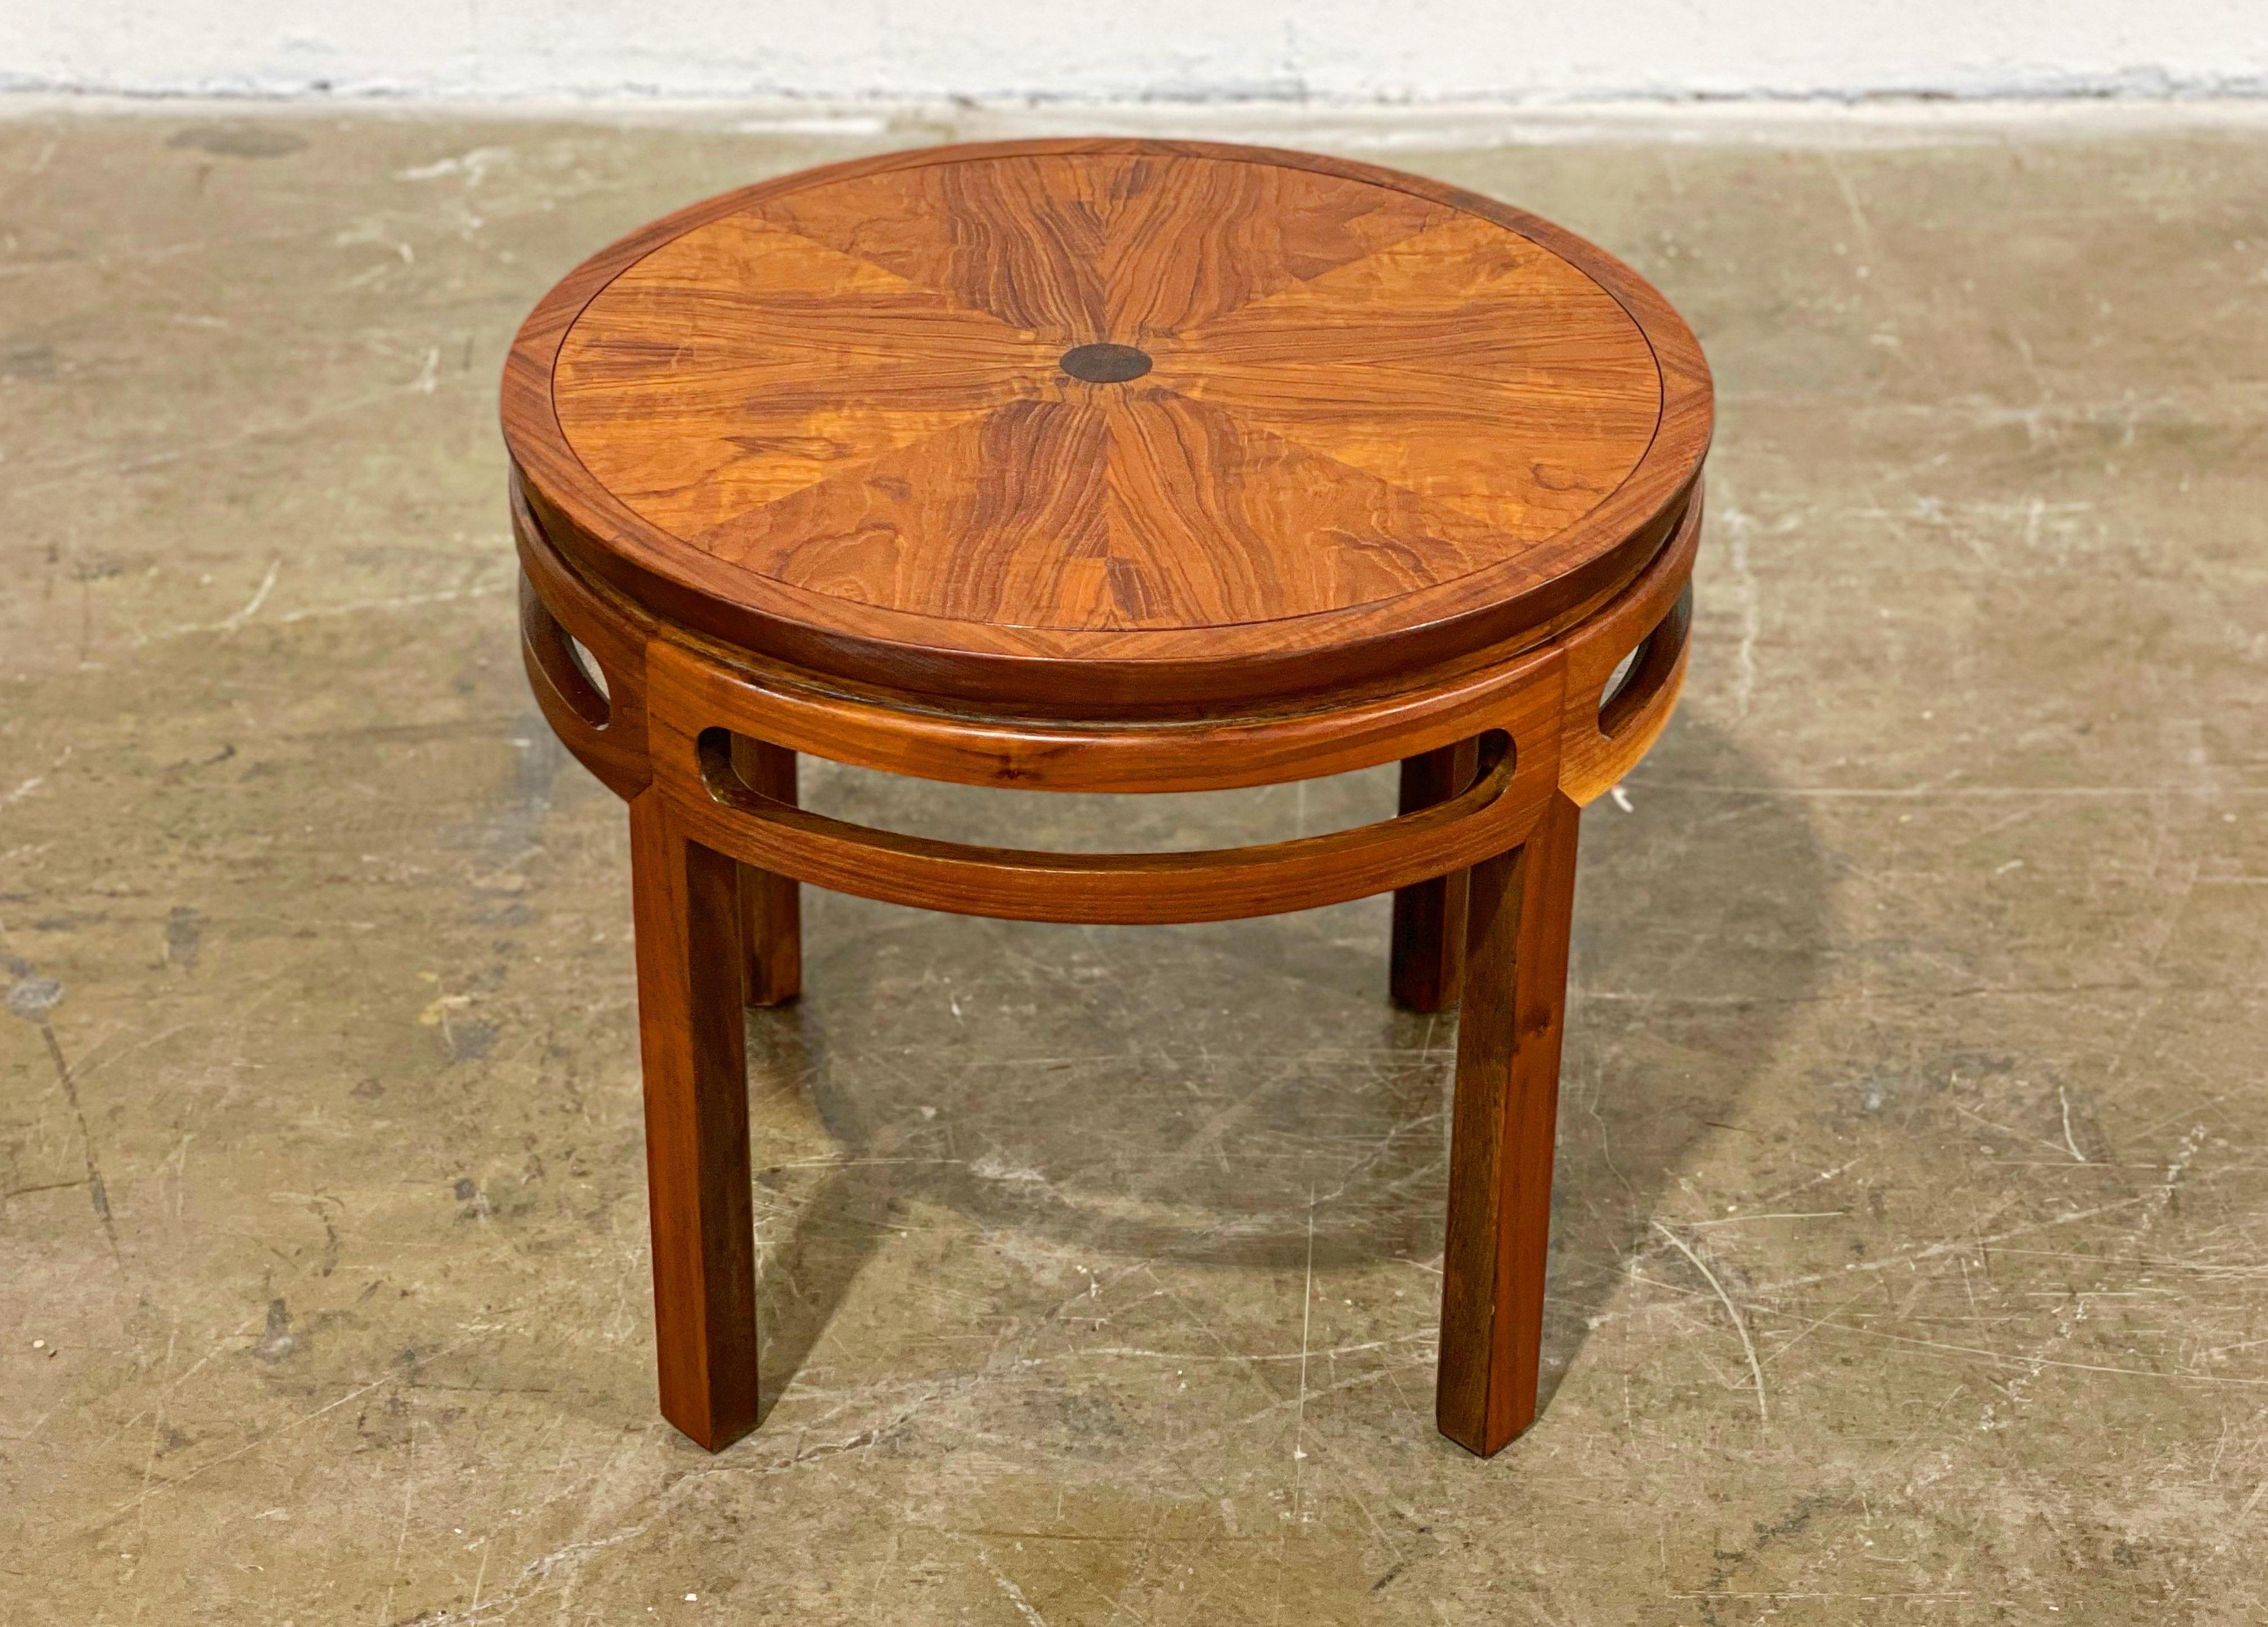 Exquisite round occasional table in book matched walnut with a burled walnut inlay by Michael Taylor for Baker Furniture. Fully restored by our team of in-house craftspeople. Stunning book matched sunburst grain pattern on the top. Gorgeous warm and